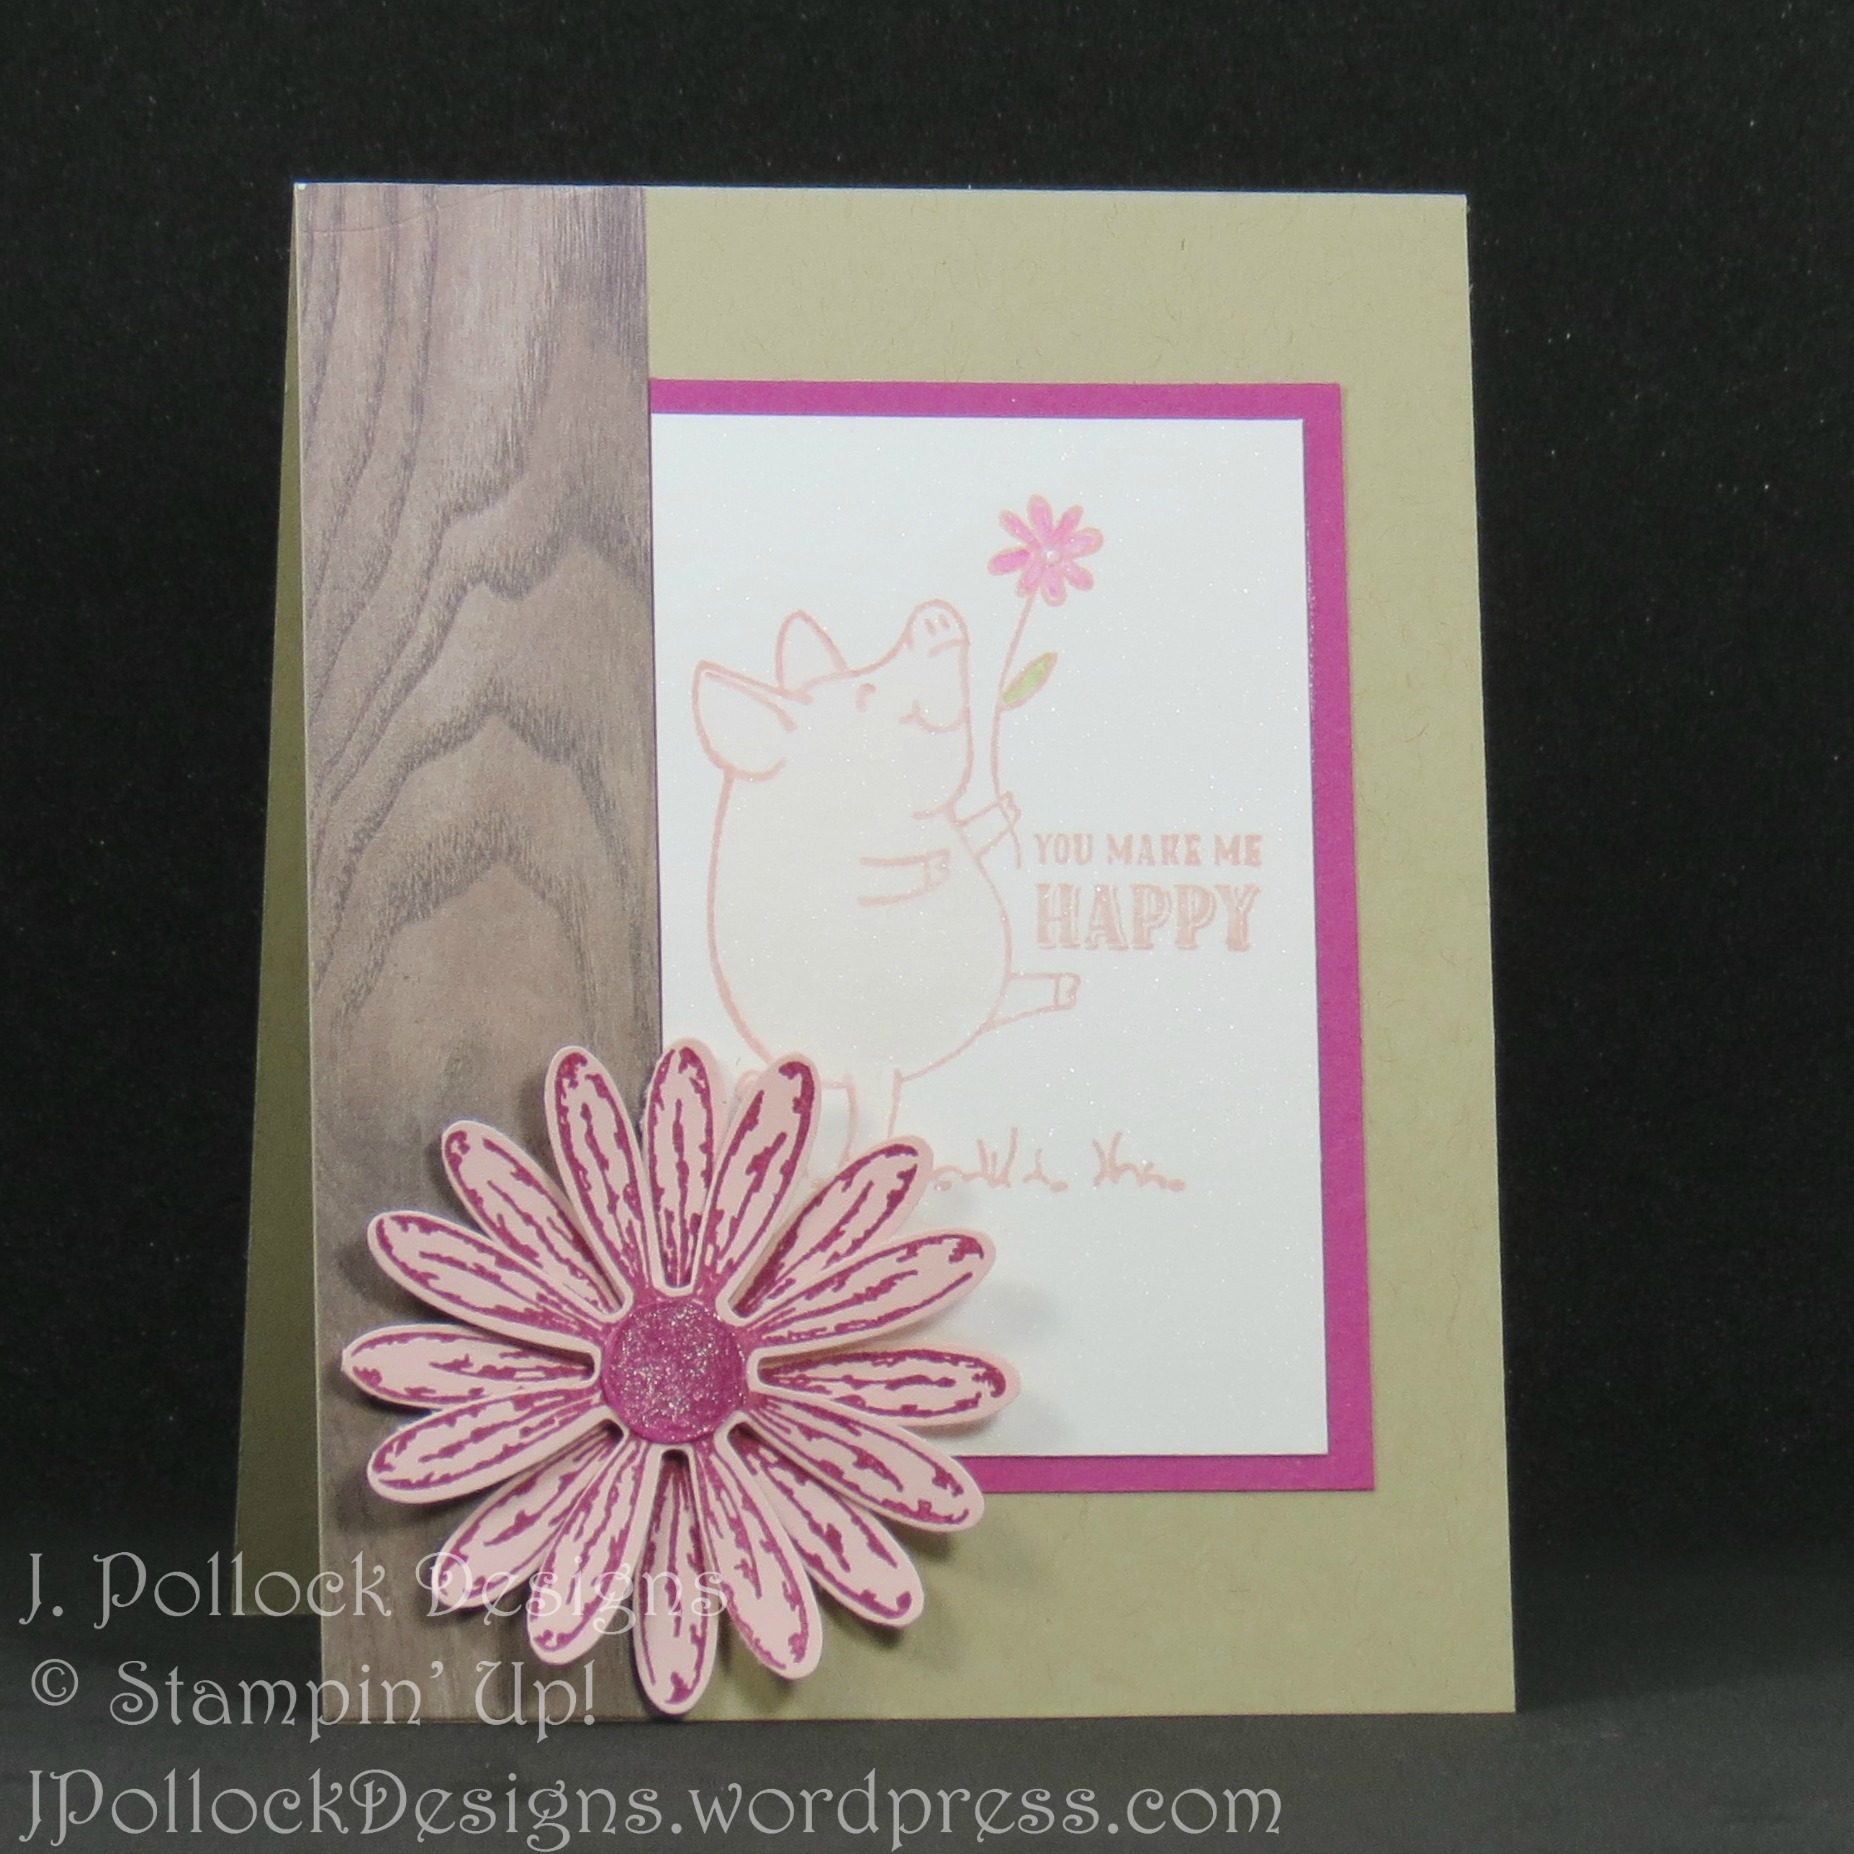 J. Pollock Designs - Stampin' Up! – This Little Piggy, Daisy Delight